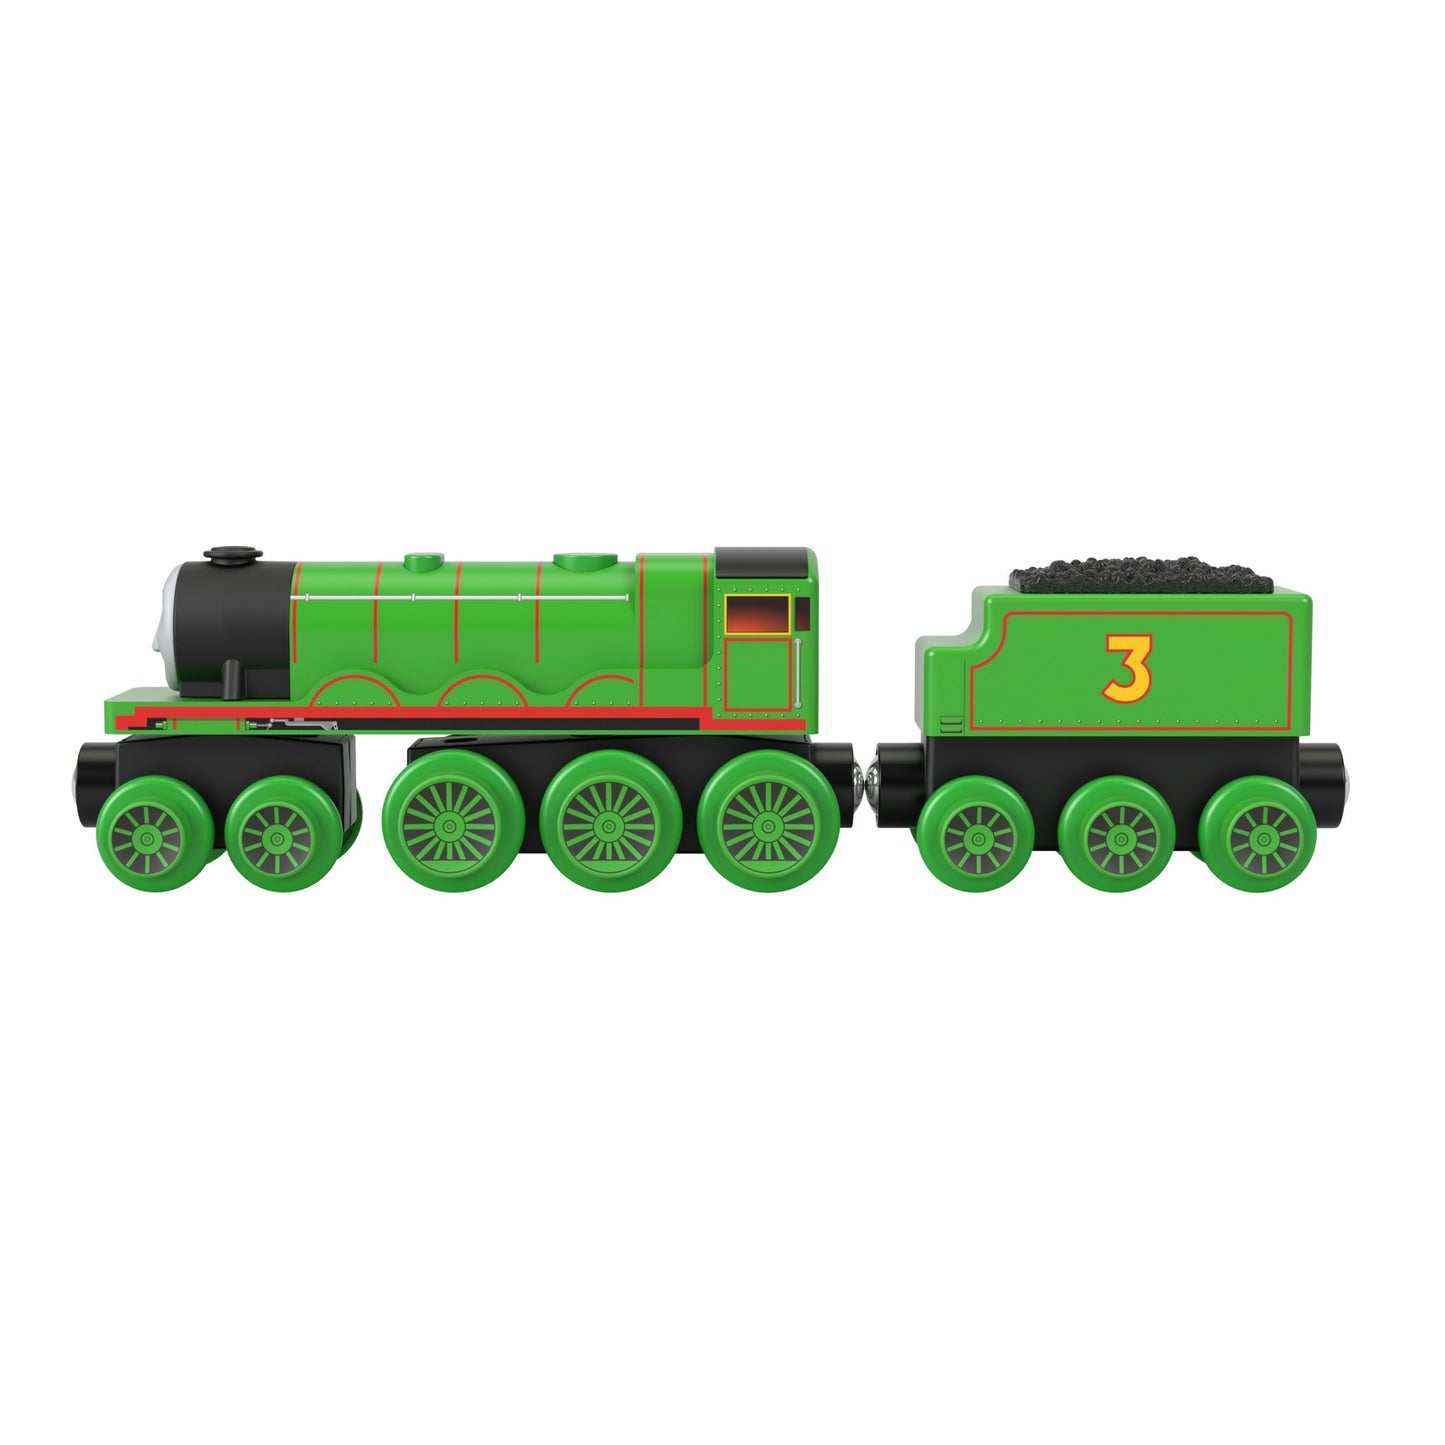 Fisher-Price Thomas & Friends Wooden Railway Henry Engine and Coal-Car